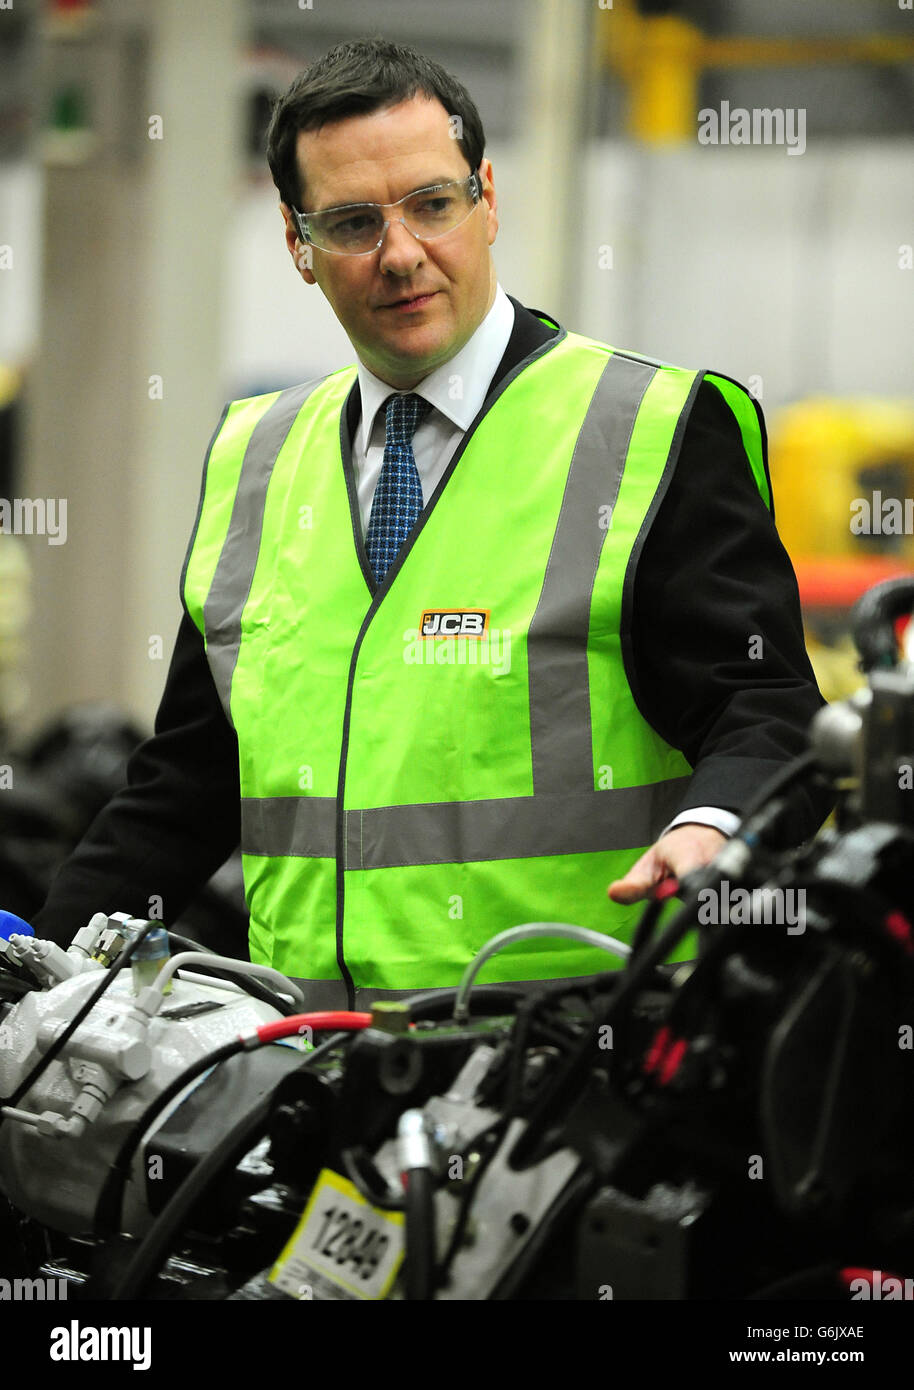 The Chancellor of the Exchequer George Osborne during a visit to JCB's backhoe loader factory in Rocester, Staffordshire. JCB announced today plans to invest £150 million to expand its operations in Staffordshire and create an additional 2.500 jobs by 2018. Stock Photo